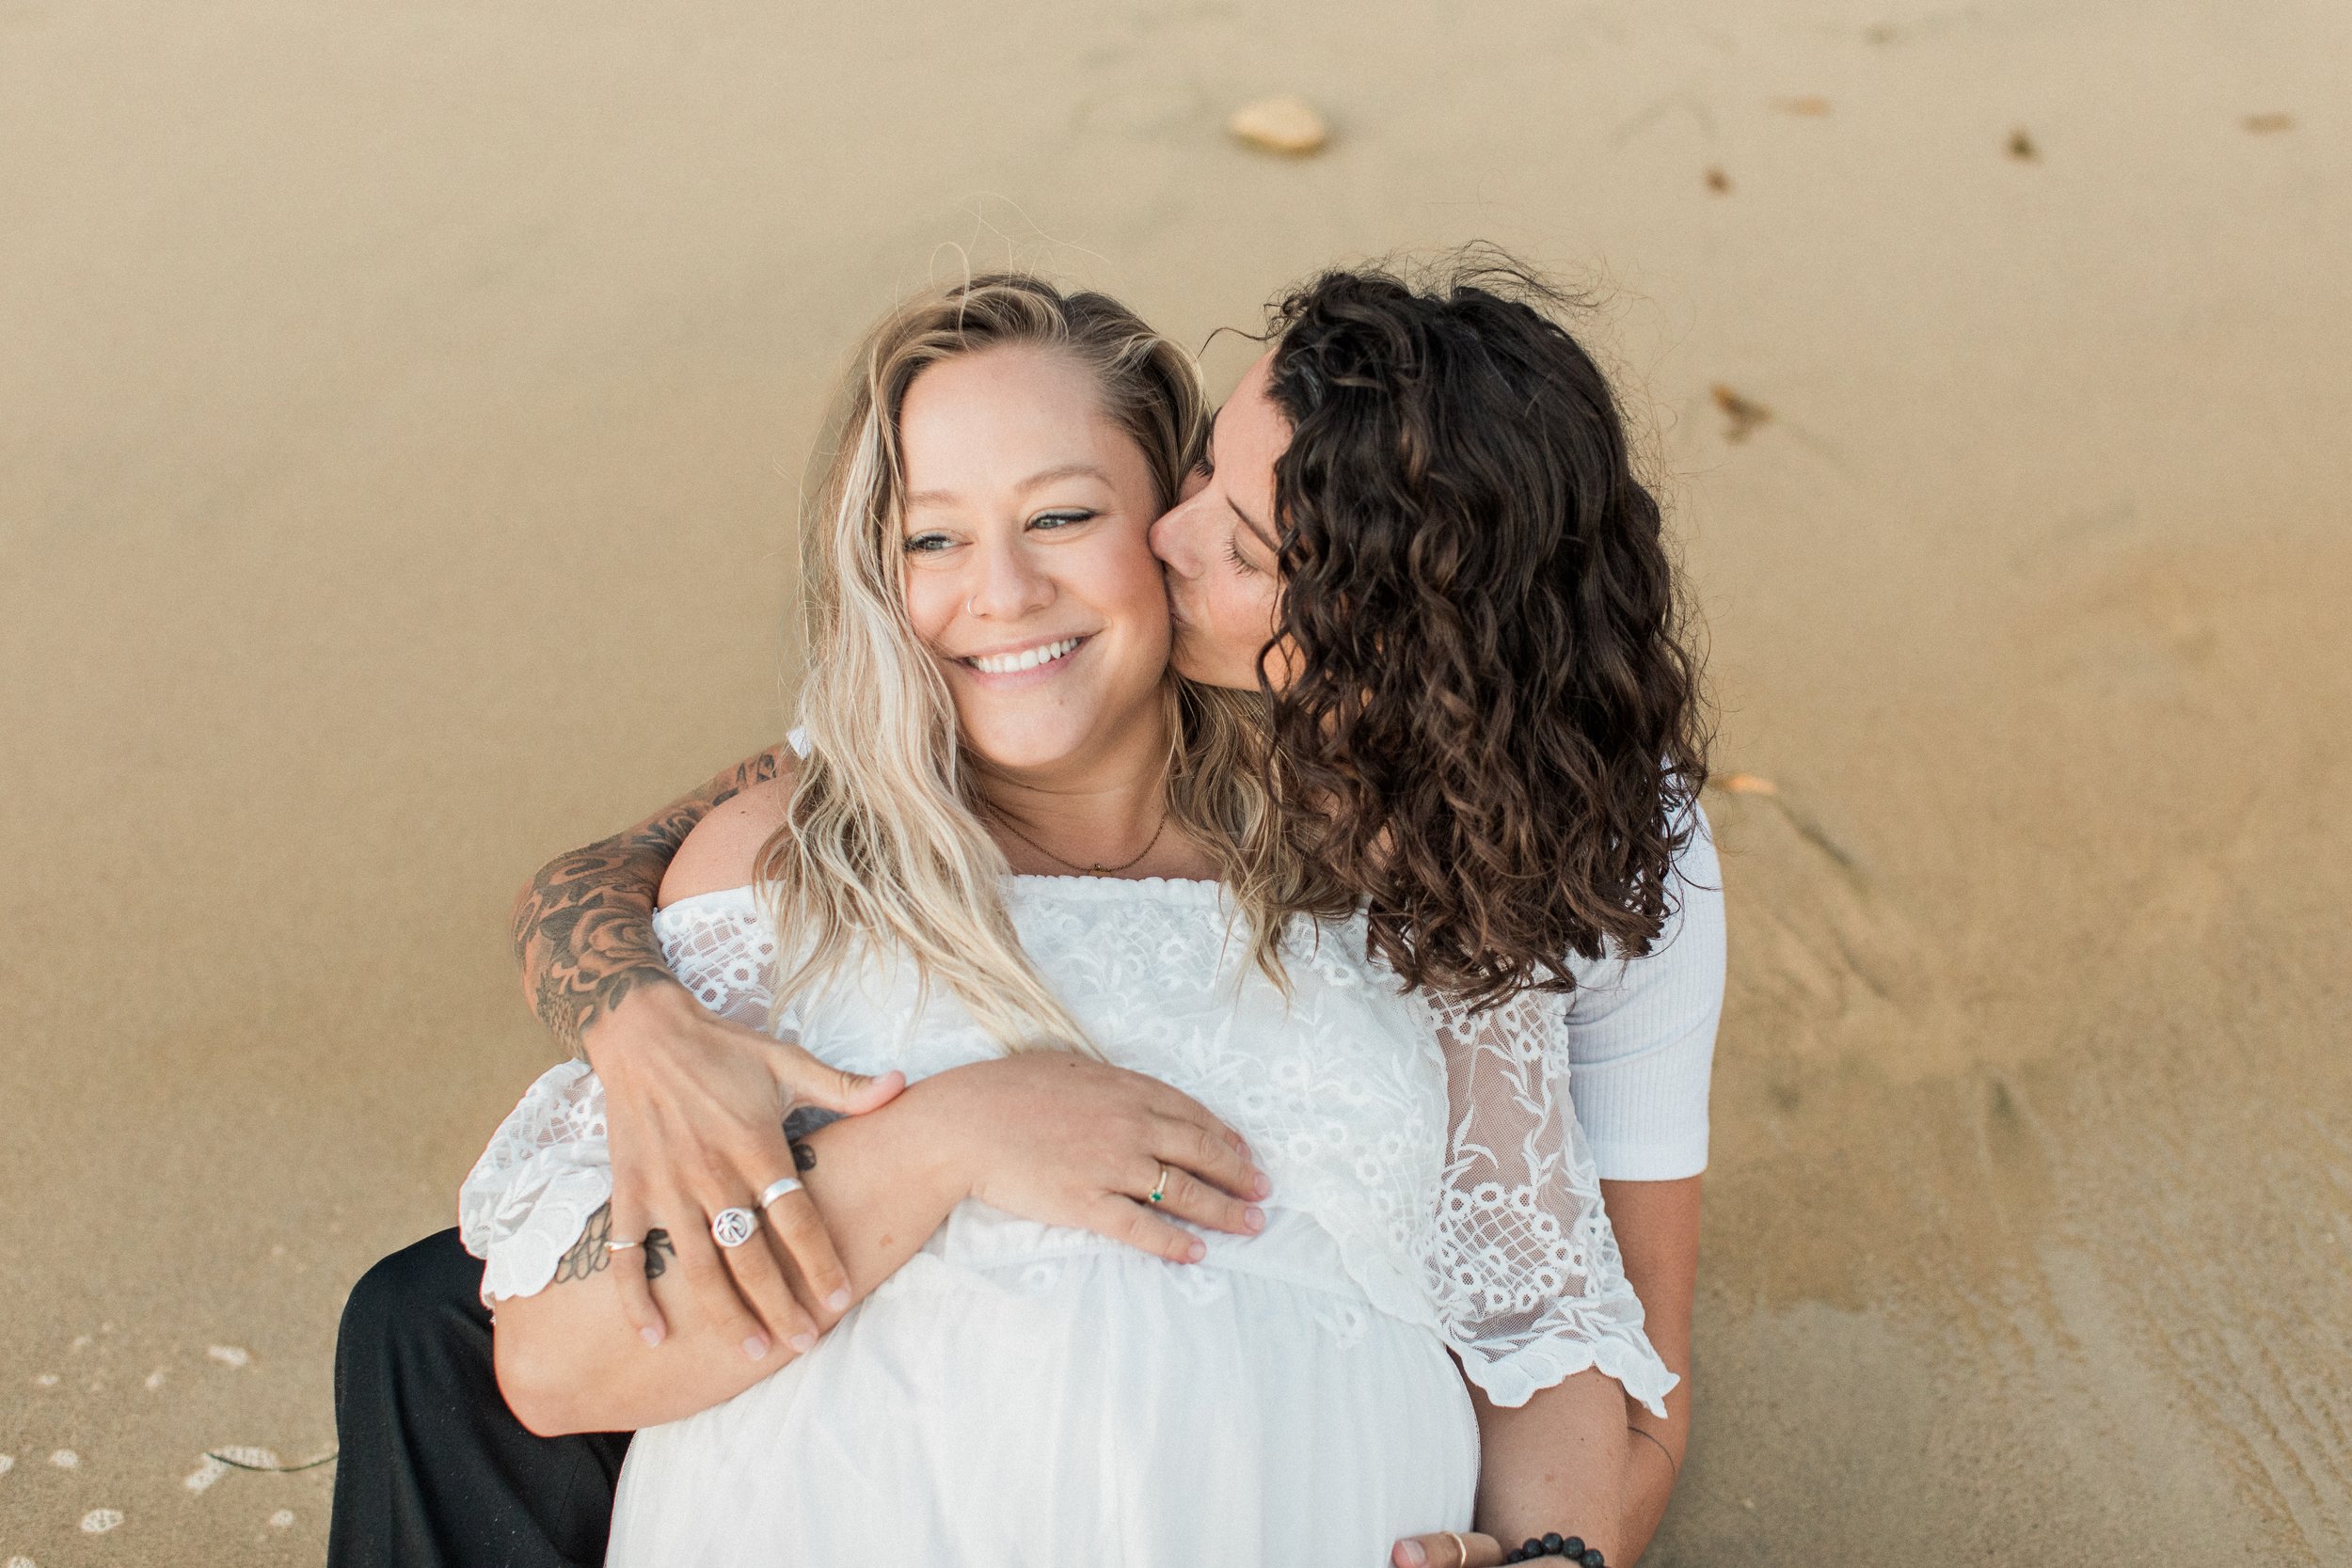 Jayden Campbell Photography LGBTQ Maternity Session Photographer Great Lakes Ontario Canada